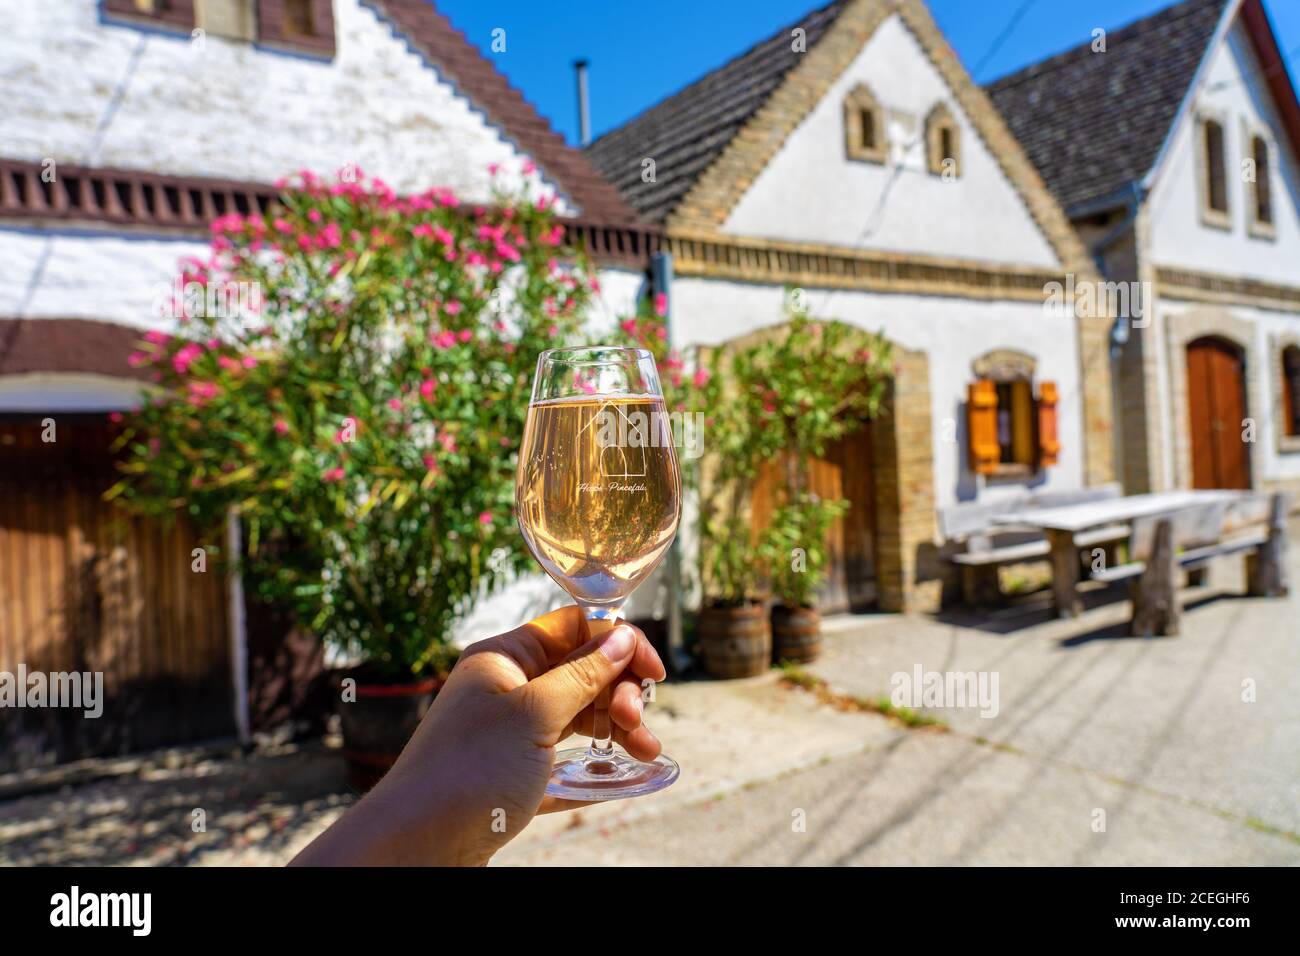 Hajos, Hungary - 08.21.2020: drinking rose wine with soda in Hajos cellar village on a terrace with roof tops pincefalu means cellar village Stock Photo